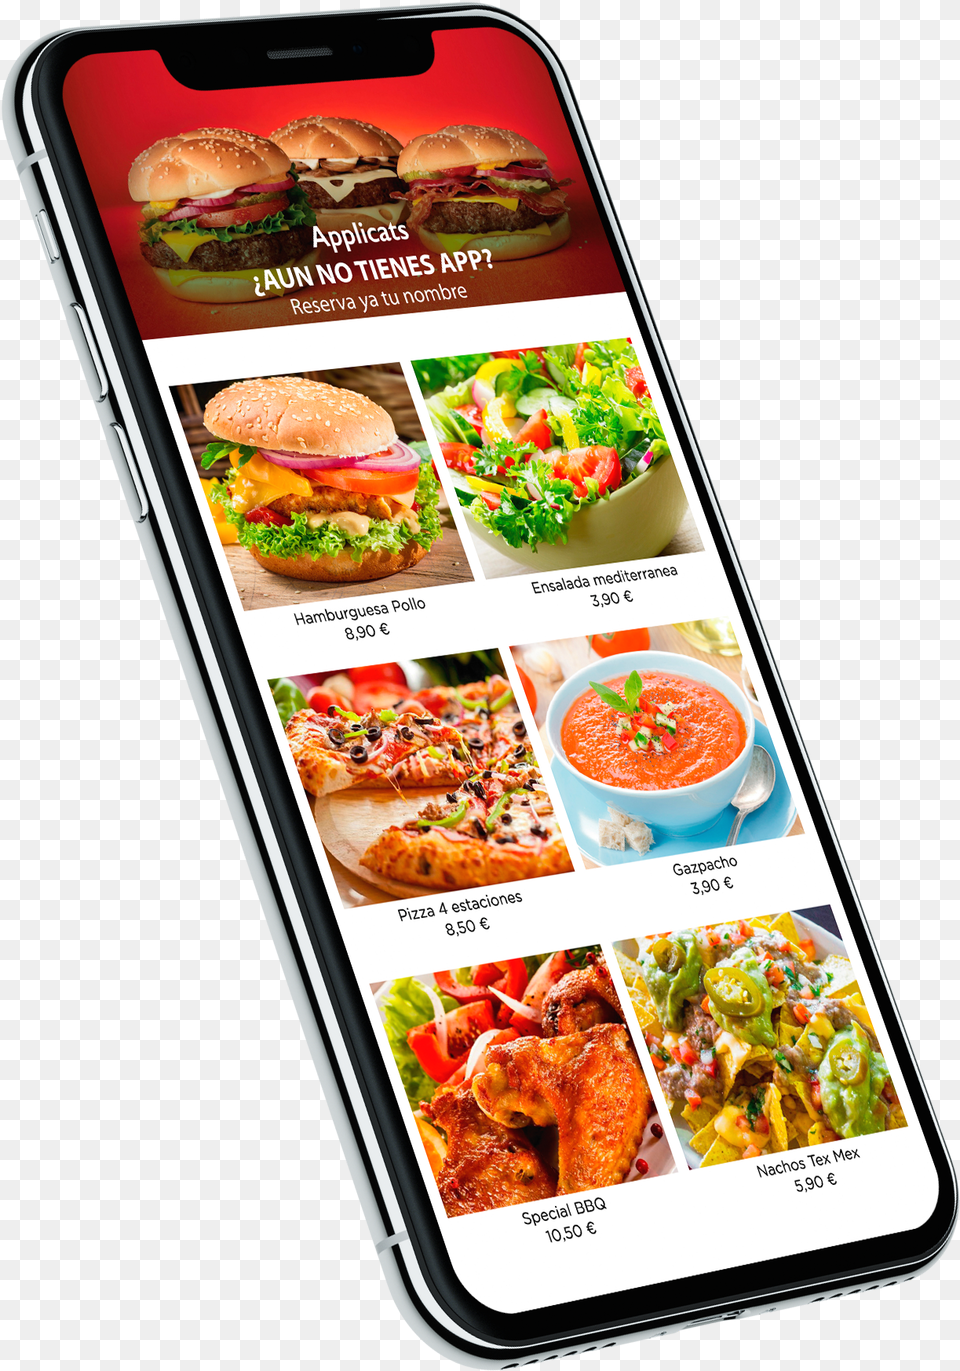 Applicats Fast Food, Burger, Lunch, Meal, Electronics Png Image